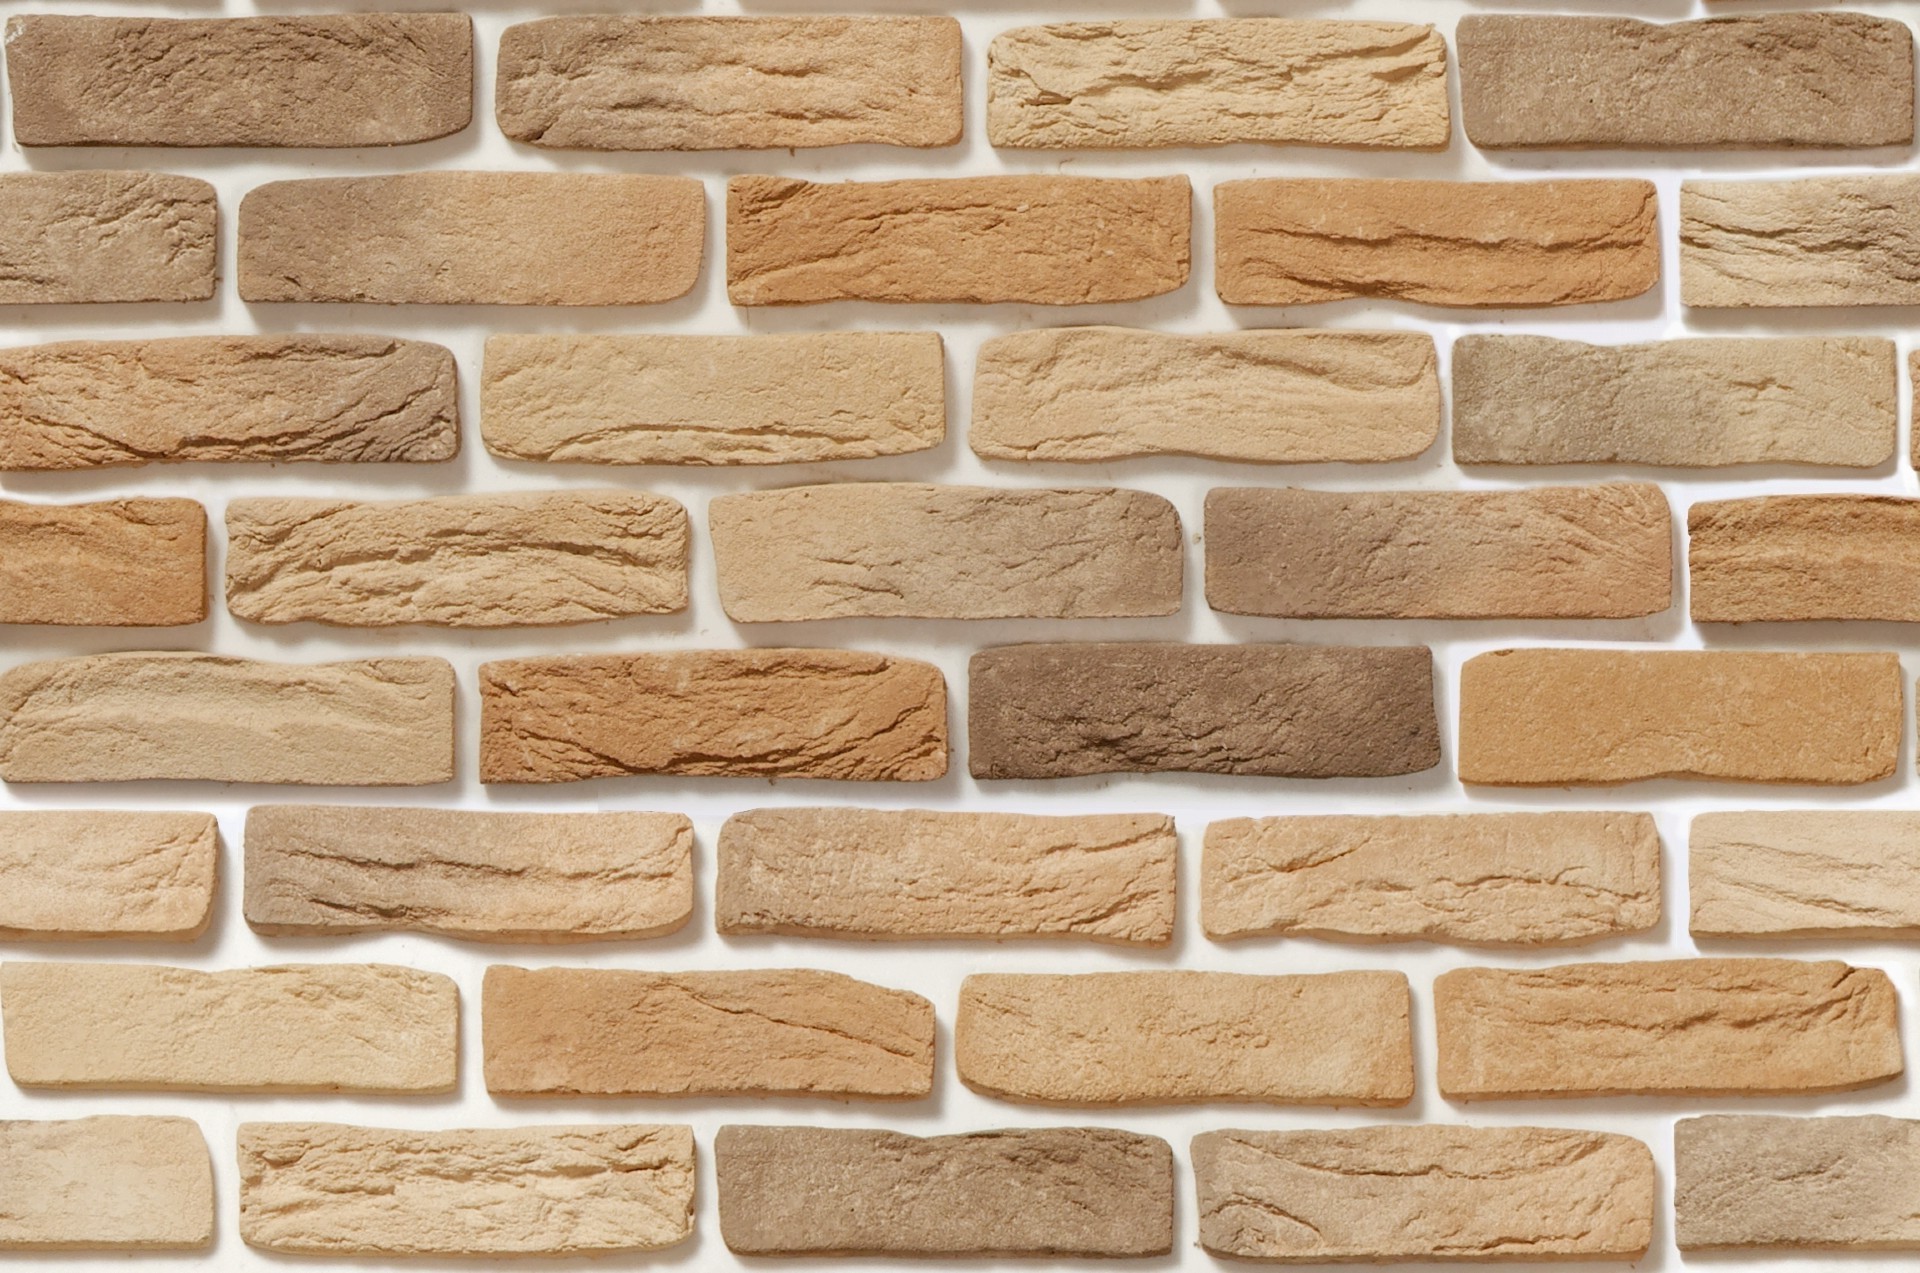 concrete wall brick desktop texture rough stone expression cement pattern old masonry cube fabric construction surface brickwork dirty solid tile